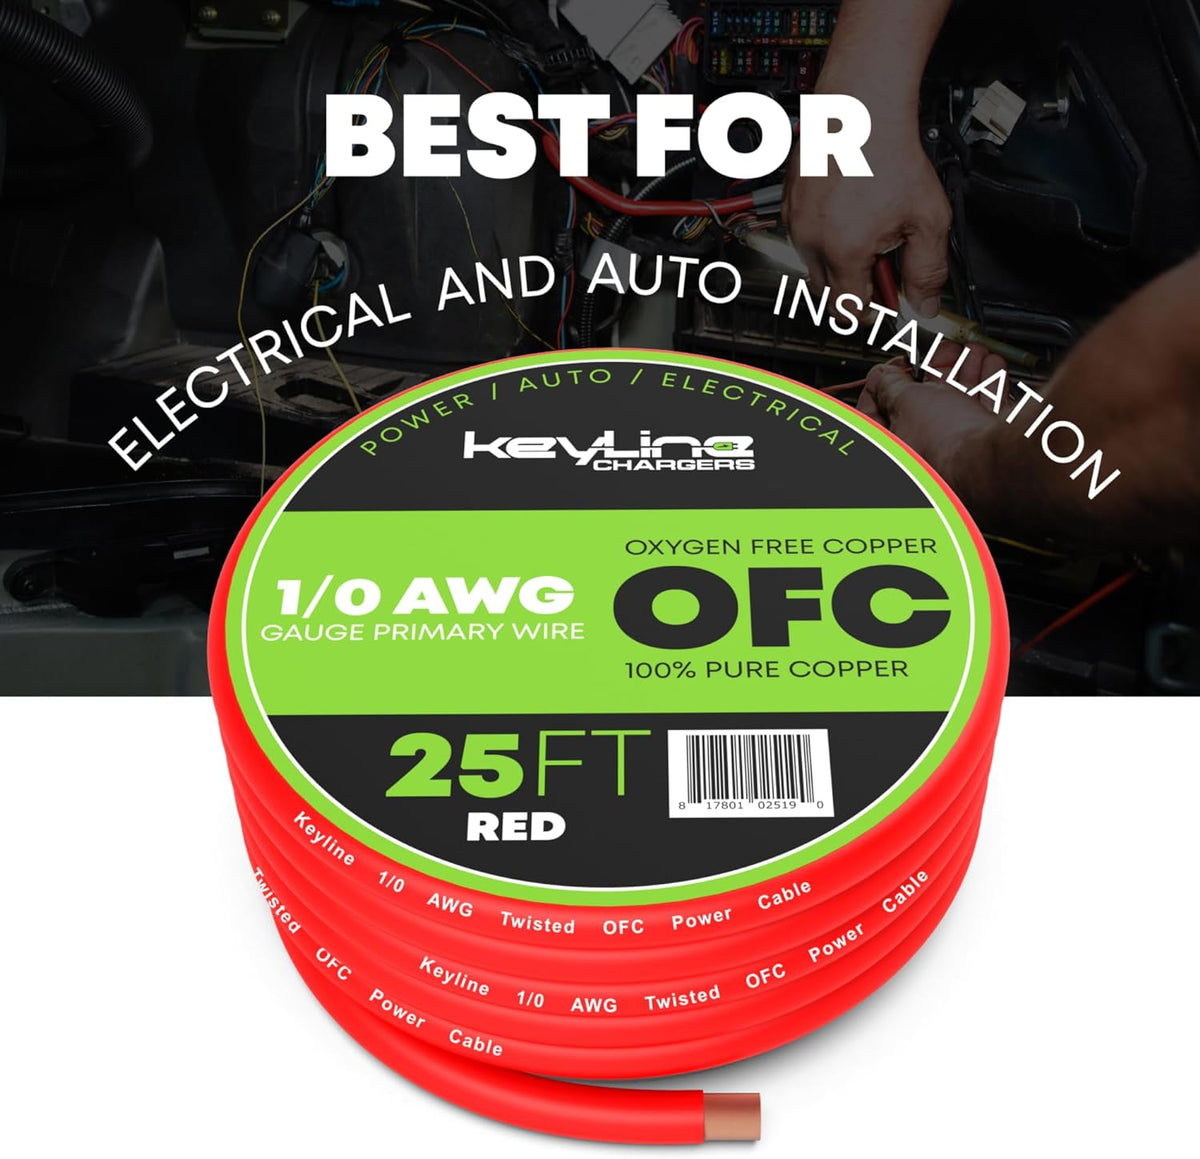 1/0 AWG Gauge Wire (25ft) Red | Oxygen Free Copper (OFC), Automotive Wire, Power/Ground, Battery Cable, True Spec Welding & Automotive, Car Audio Speaker, RV Trailer, Amp Wiring by Keyline Chargers